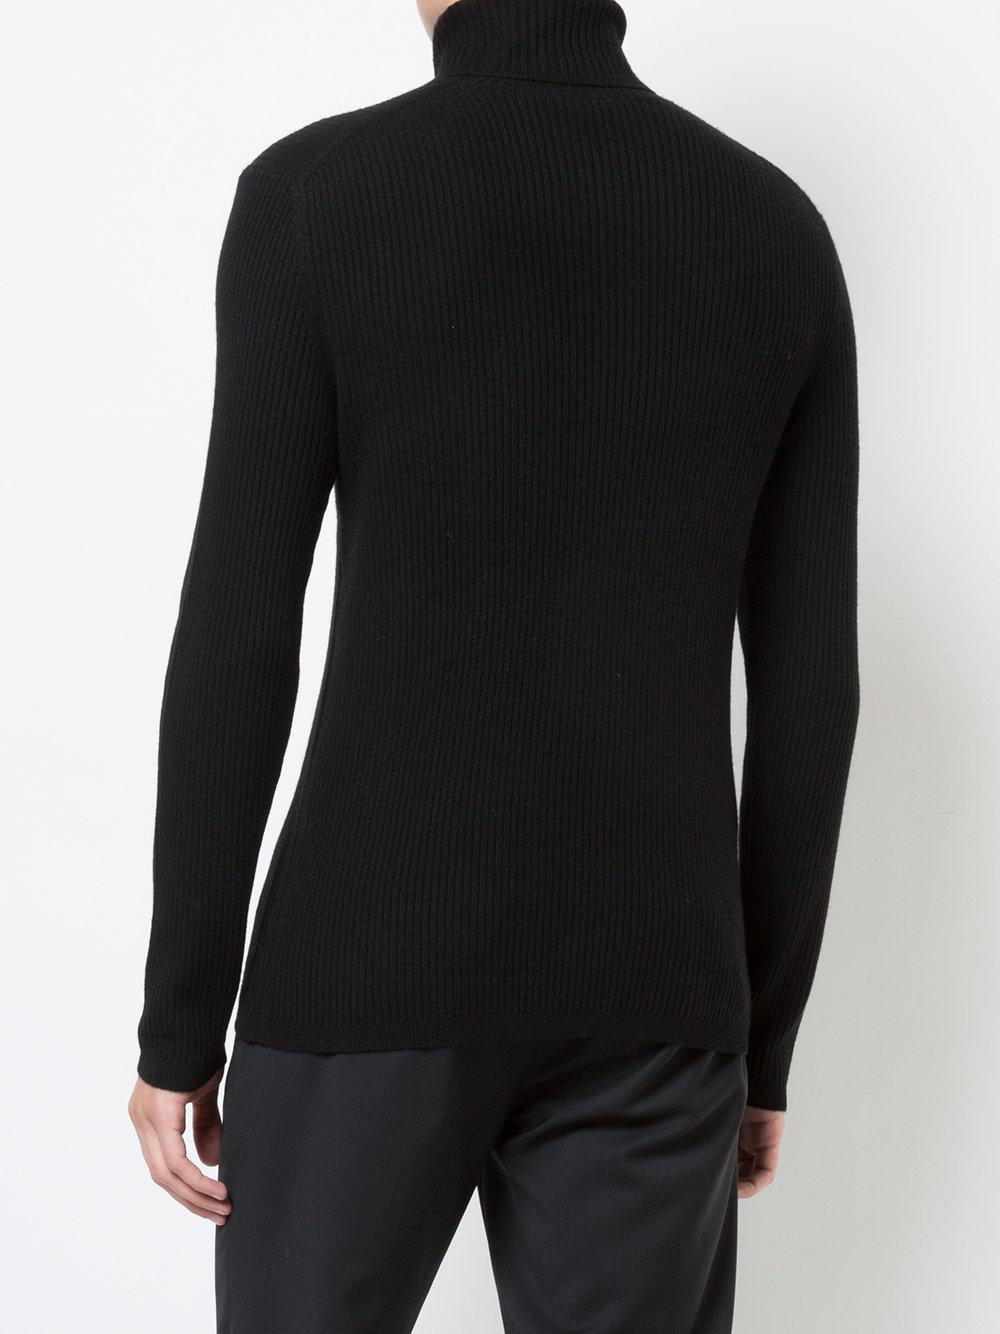 Lyst - Theory Ribbed Cashmere Jumper in Black for Men